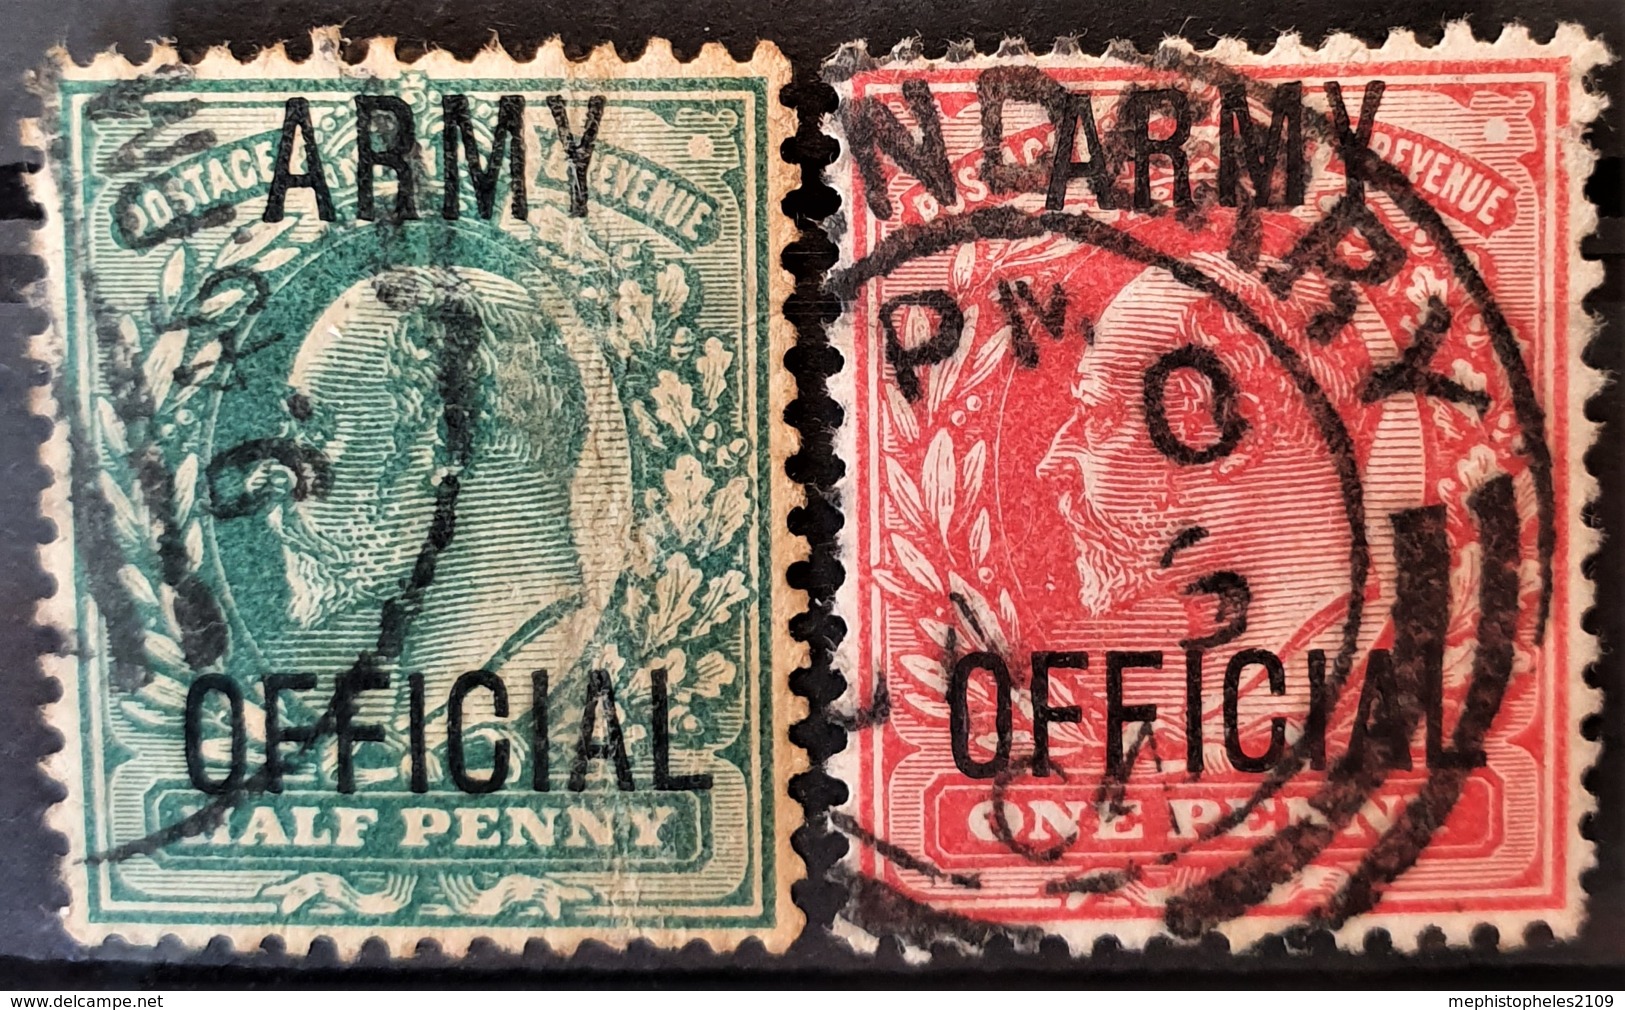 GREAT BRITAIN 1902 - Canceled - Sc# O59, O60 - Army Official 0.5d 1d - Service